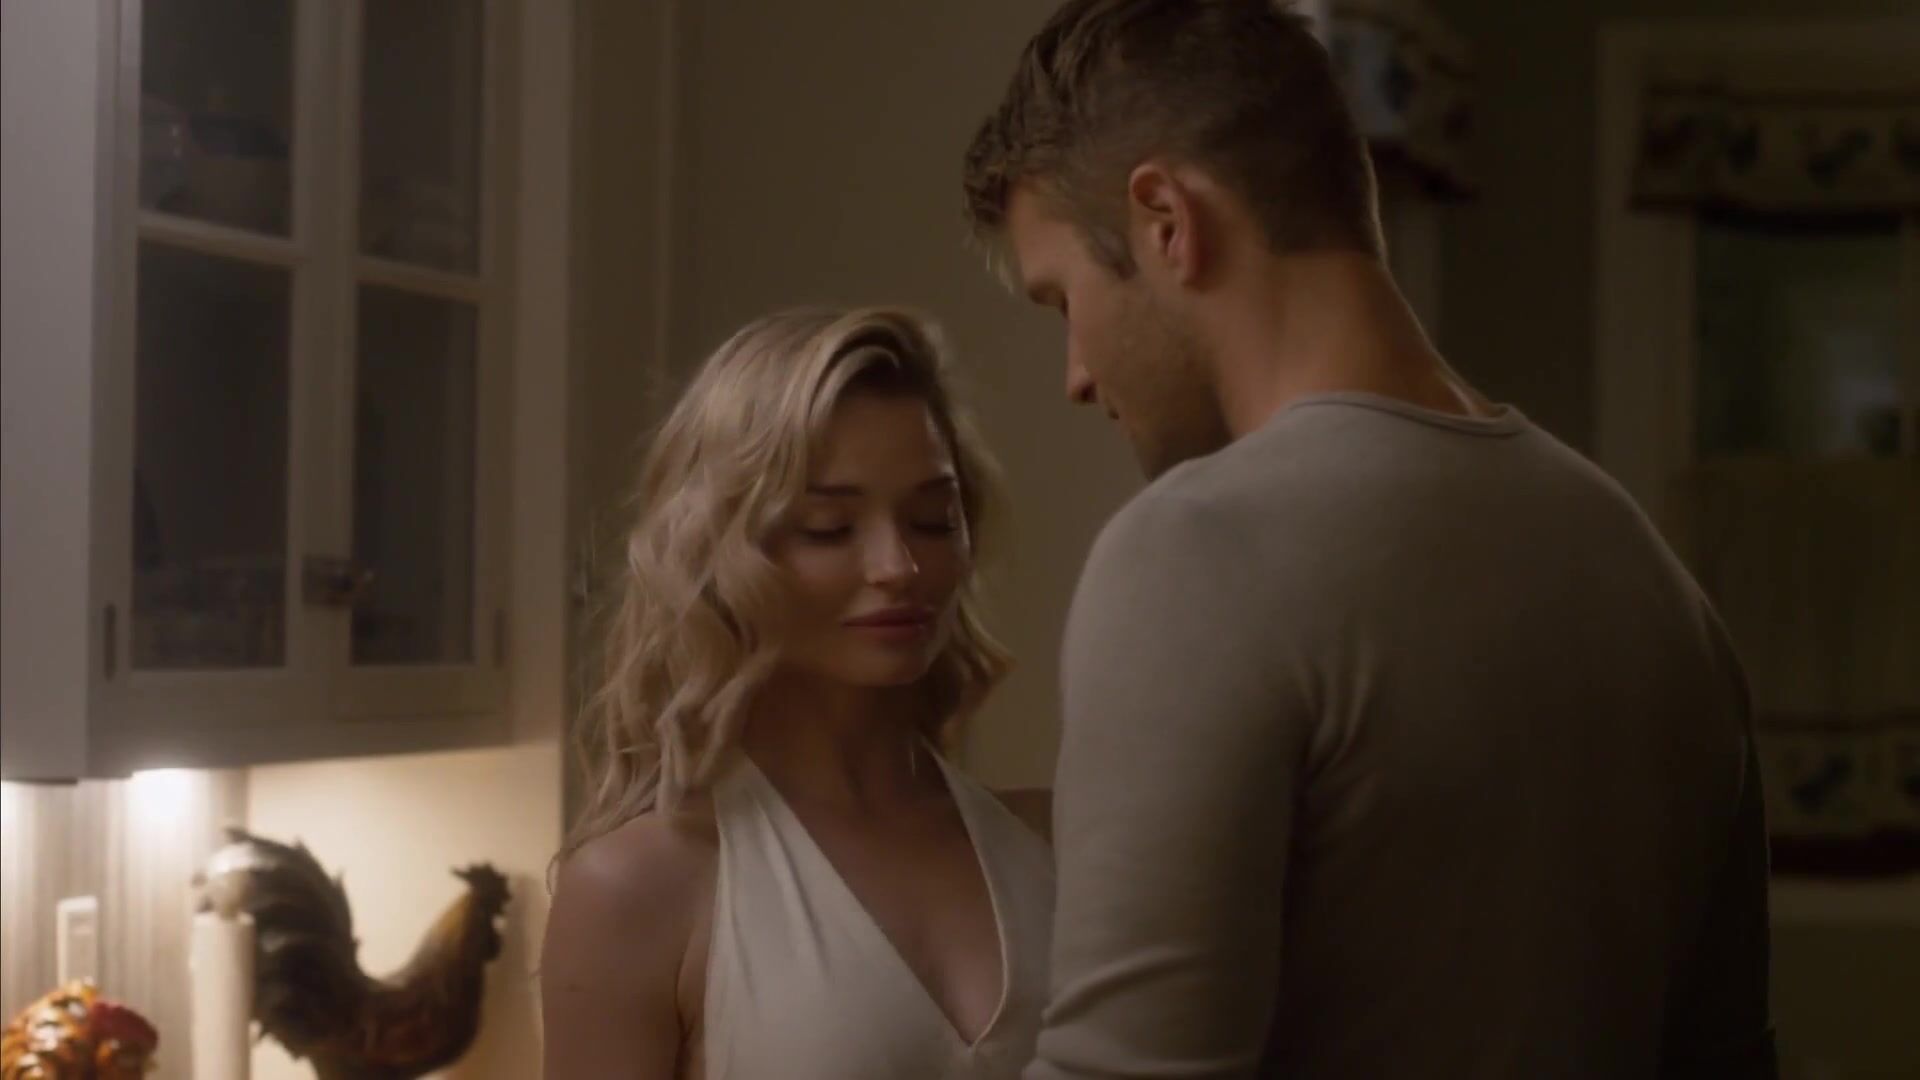 Pool Sexy British MILF Emma Rigby in sex scene from feature film Hollywood Dirt (2017) Realamateur - 2